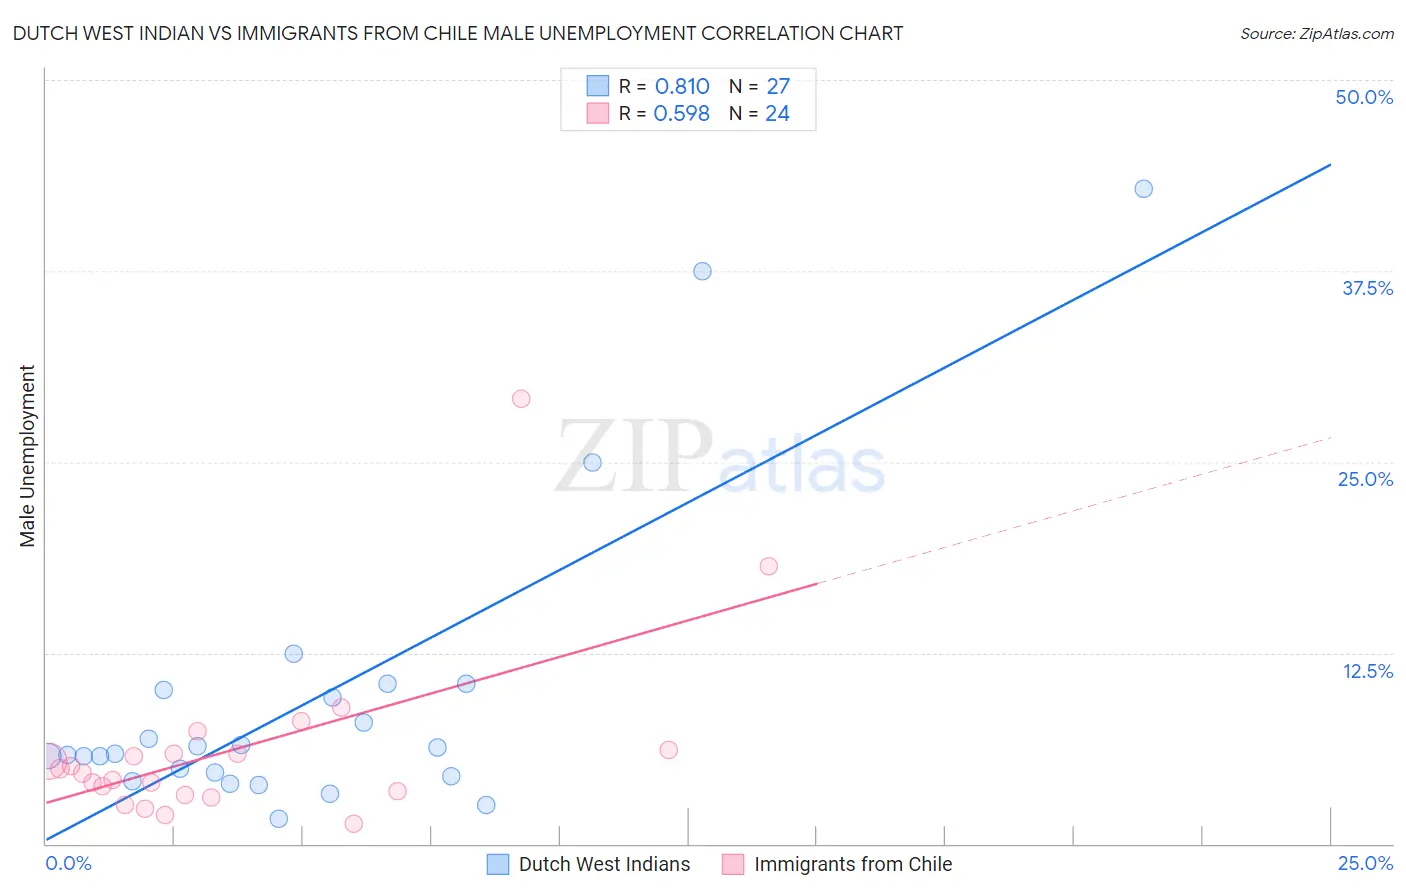 Dutch West Indian vs Immigrants from Chile Male Unemployment